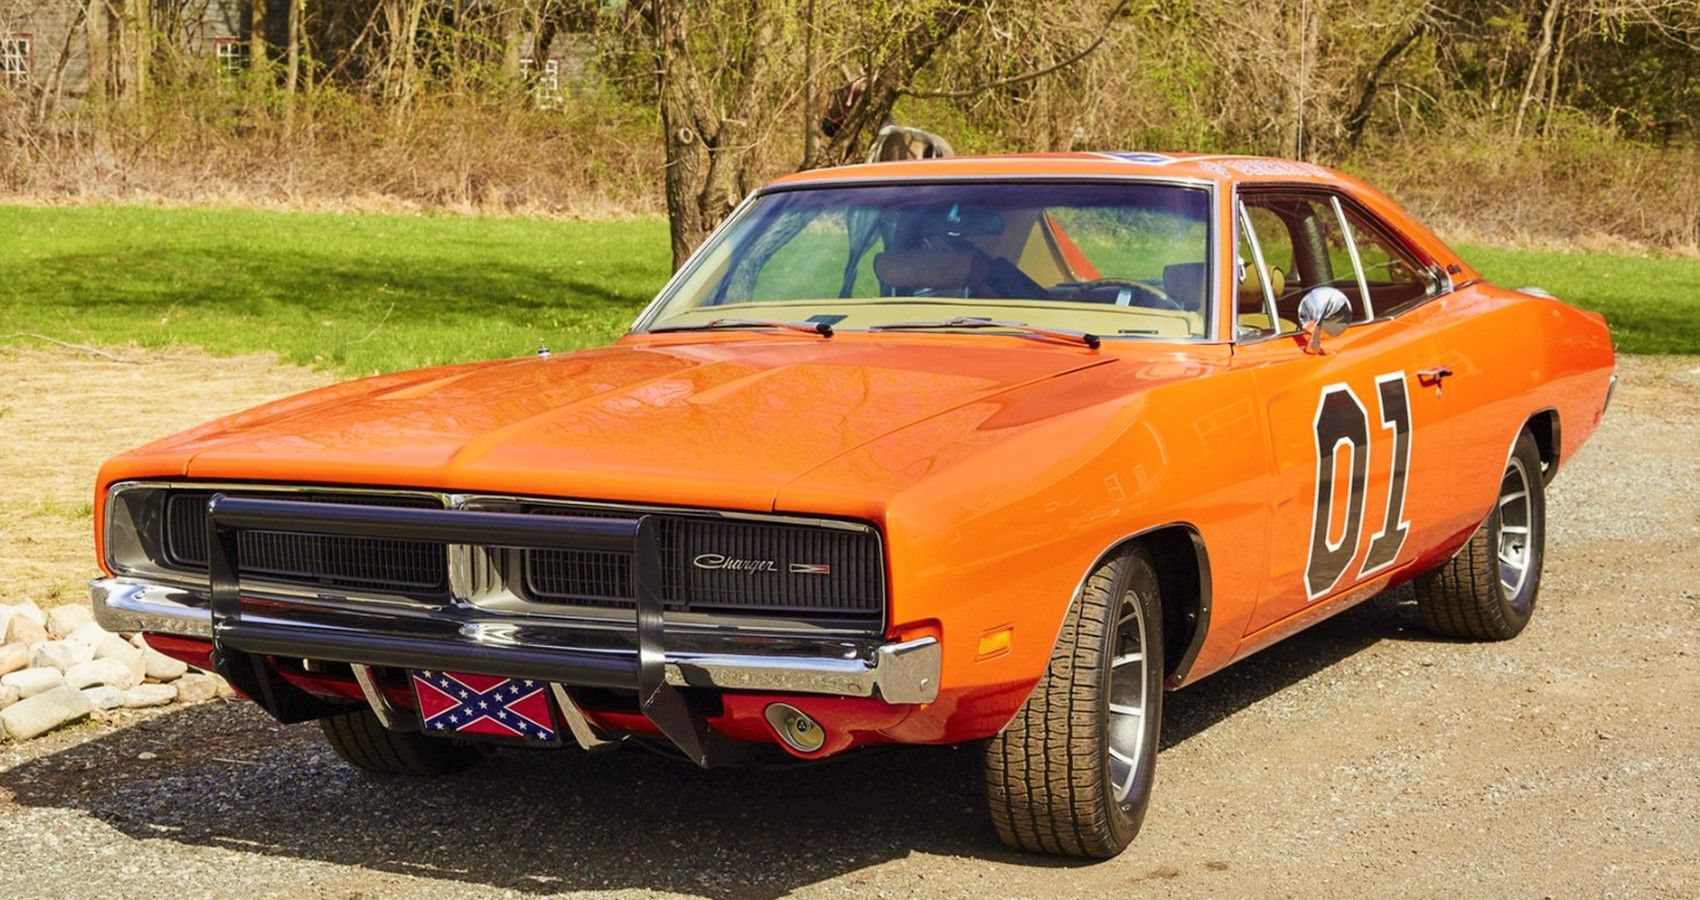 The General Lee - Dodge Charger